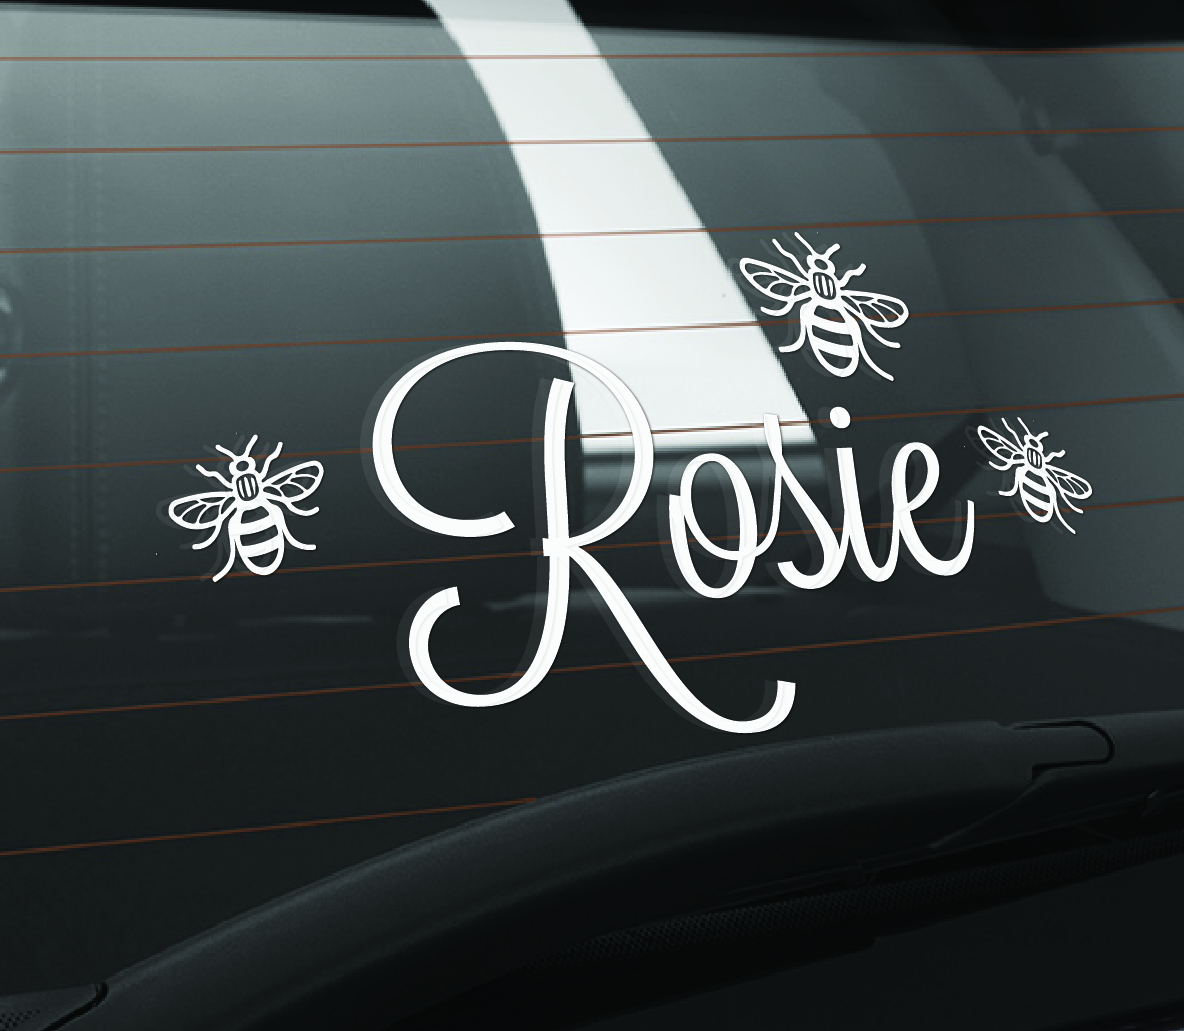 Download Manchester Bee Car Sticker Free Manchester Bee Car Stickers PSD Mockup Templates